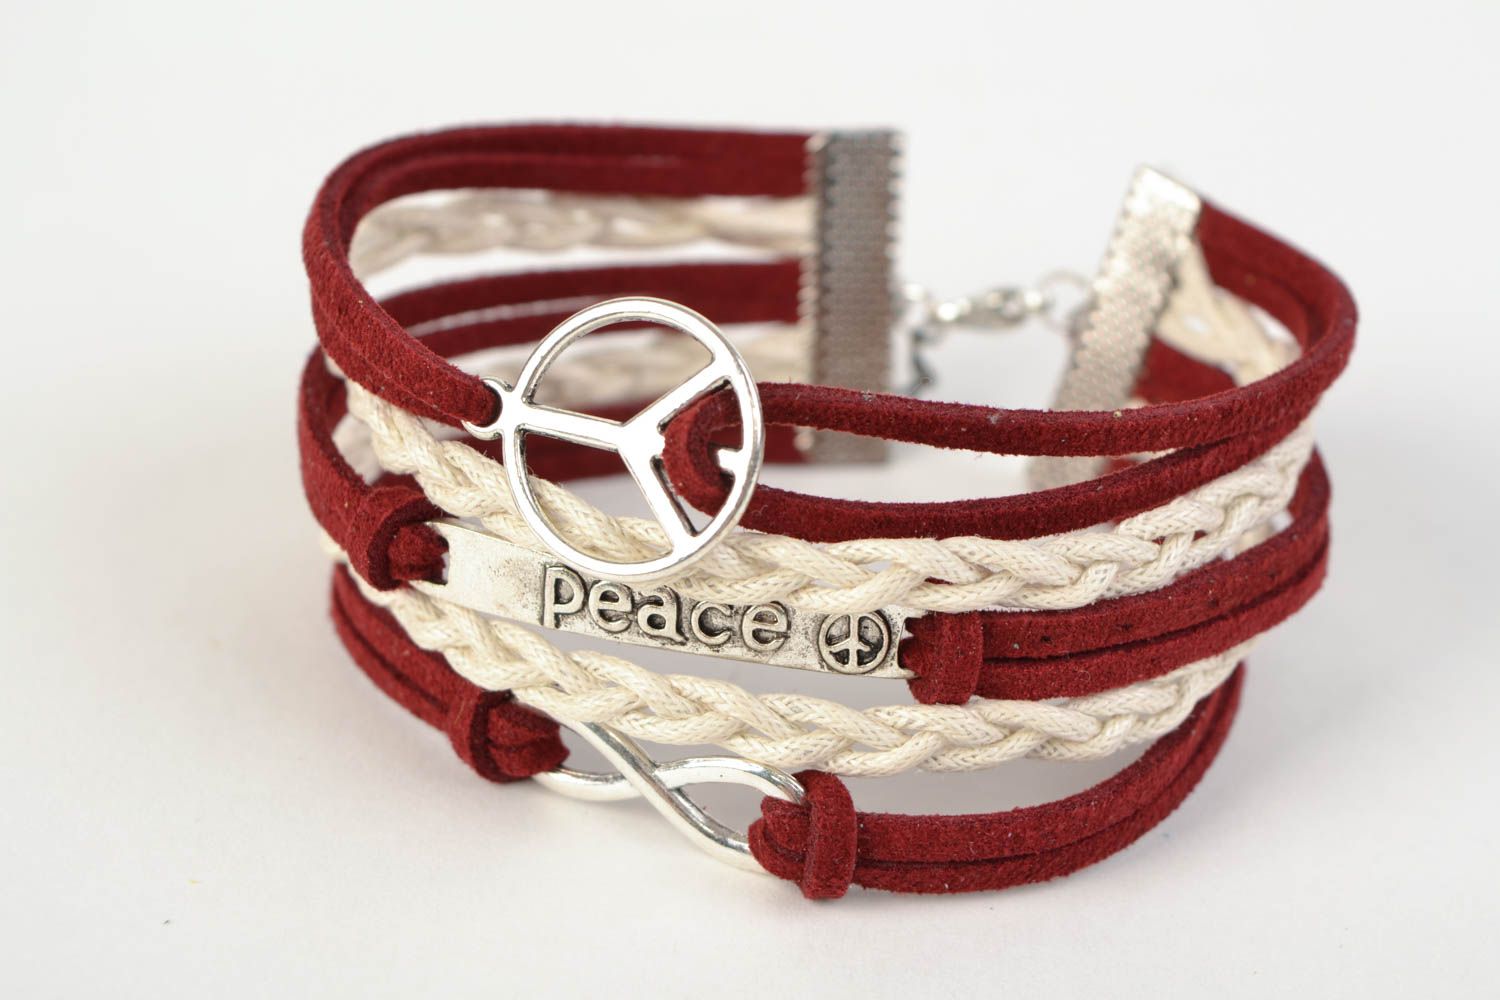 Unusual handmade woven suede bracelet with charms in the shape of various signs photo 3